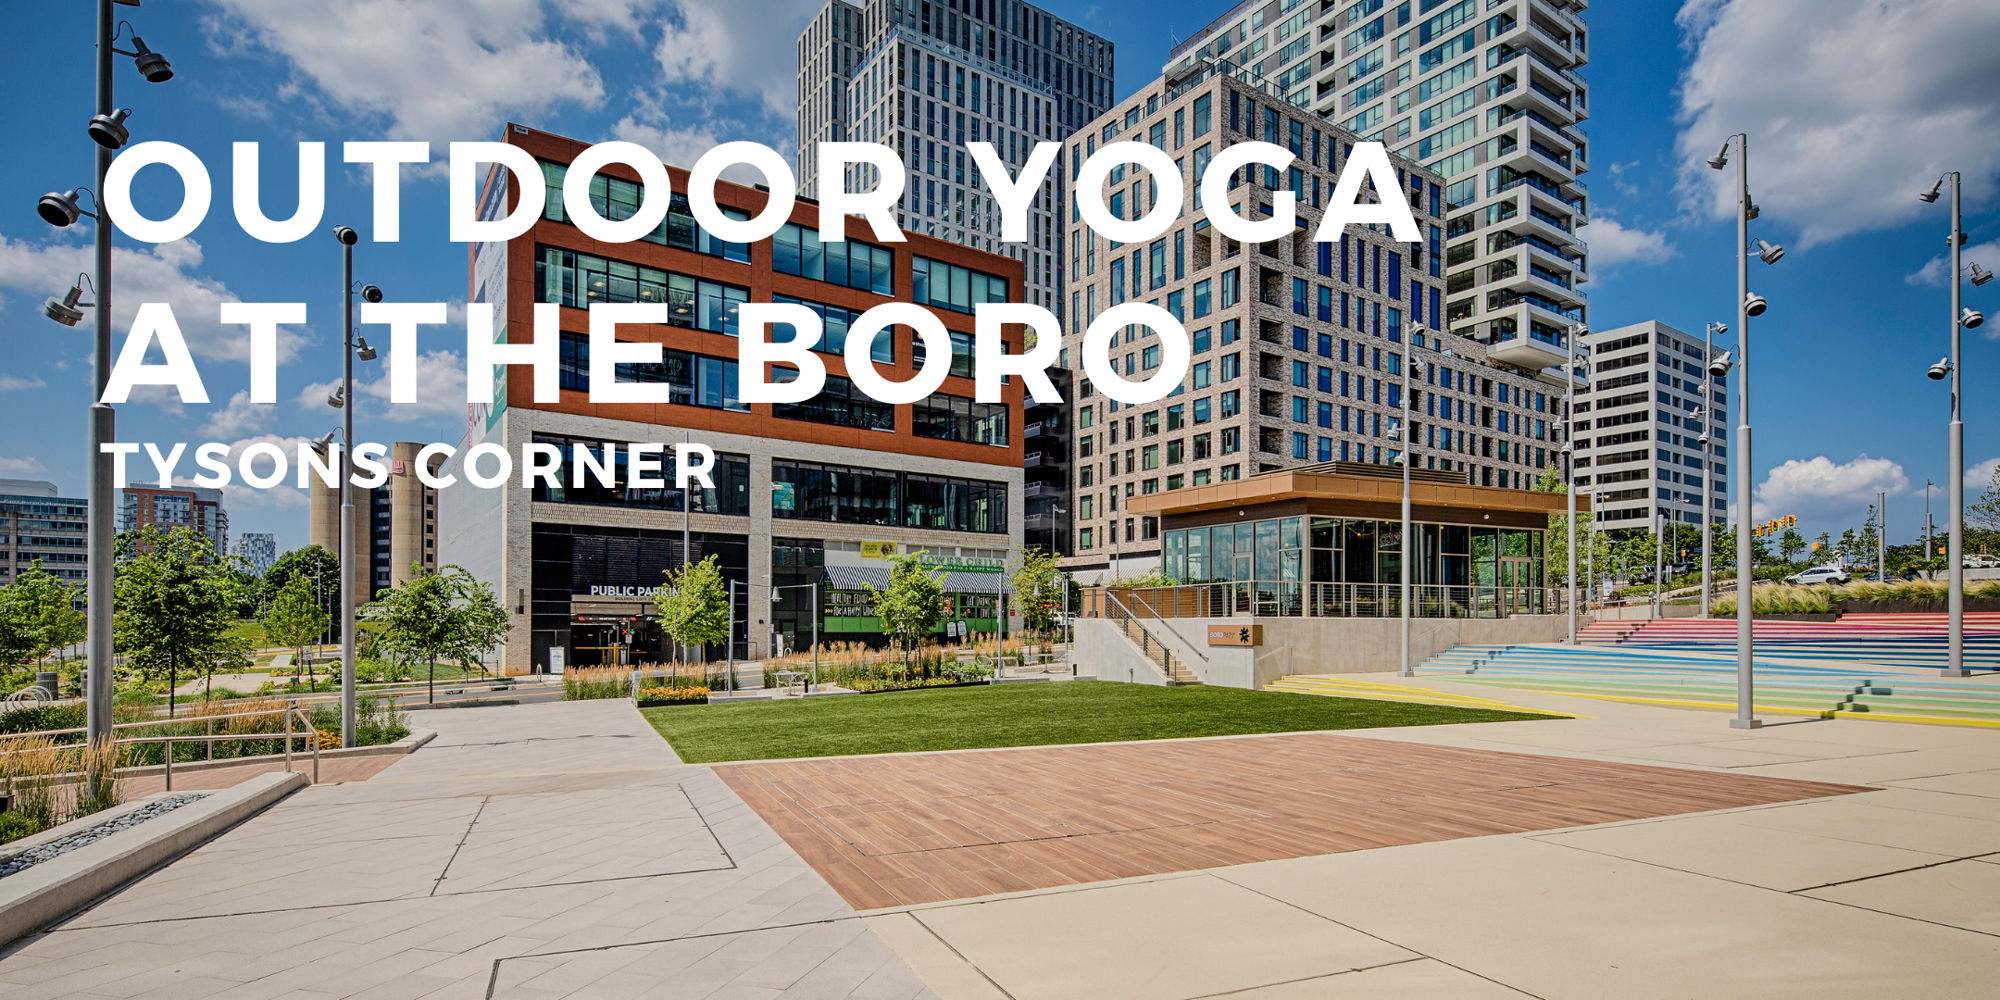 Outdoor Yoga at the Boro promotional image